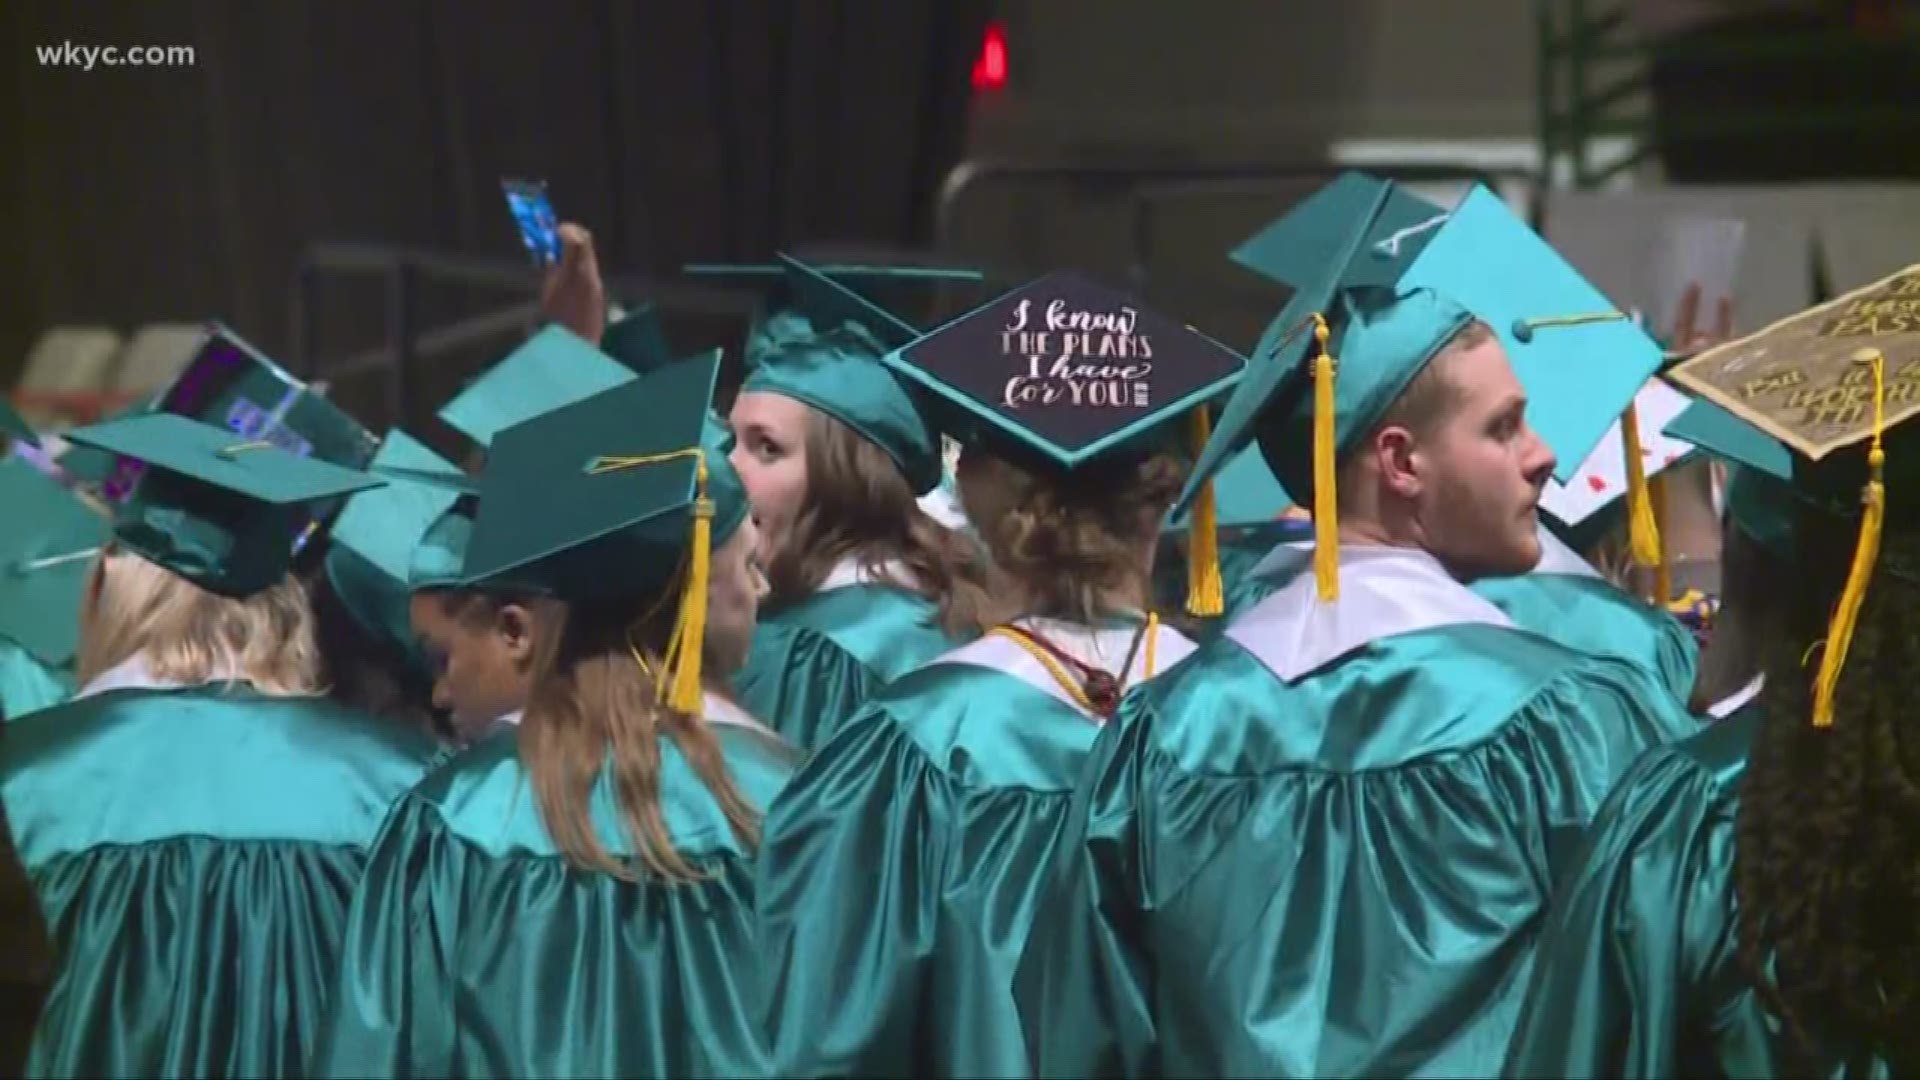 Graduation, prom, job searches,all being altered by COVID-19. 3News' Tiffany Tarpley talks with seniors being impacted.